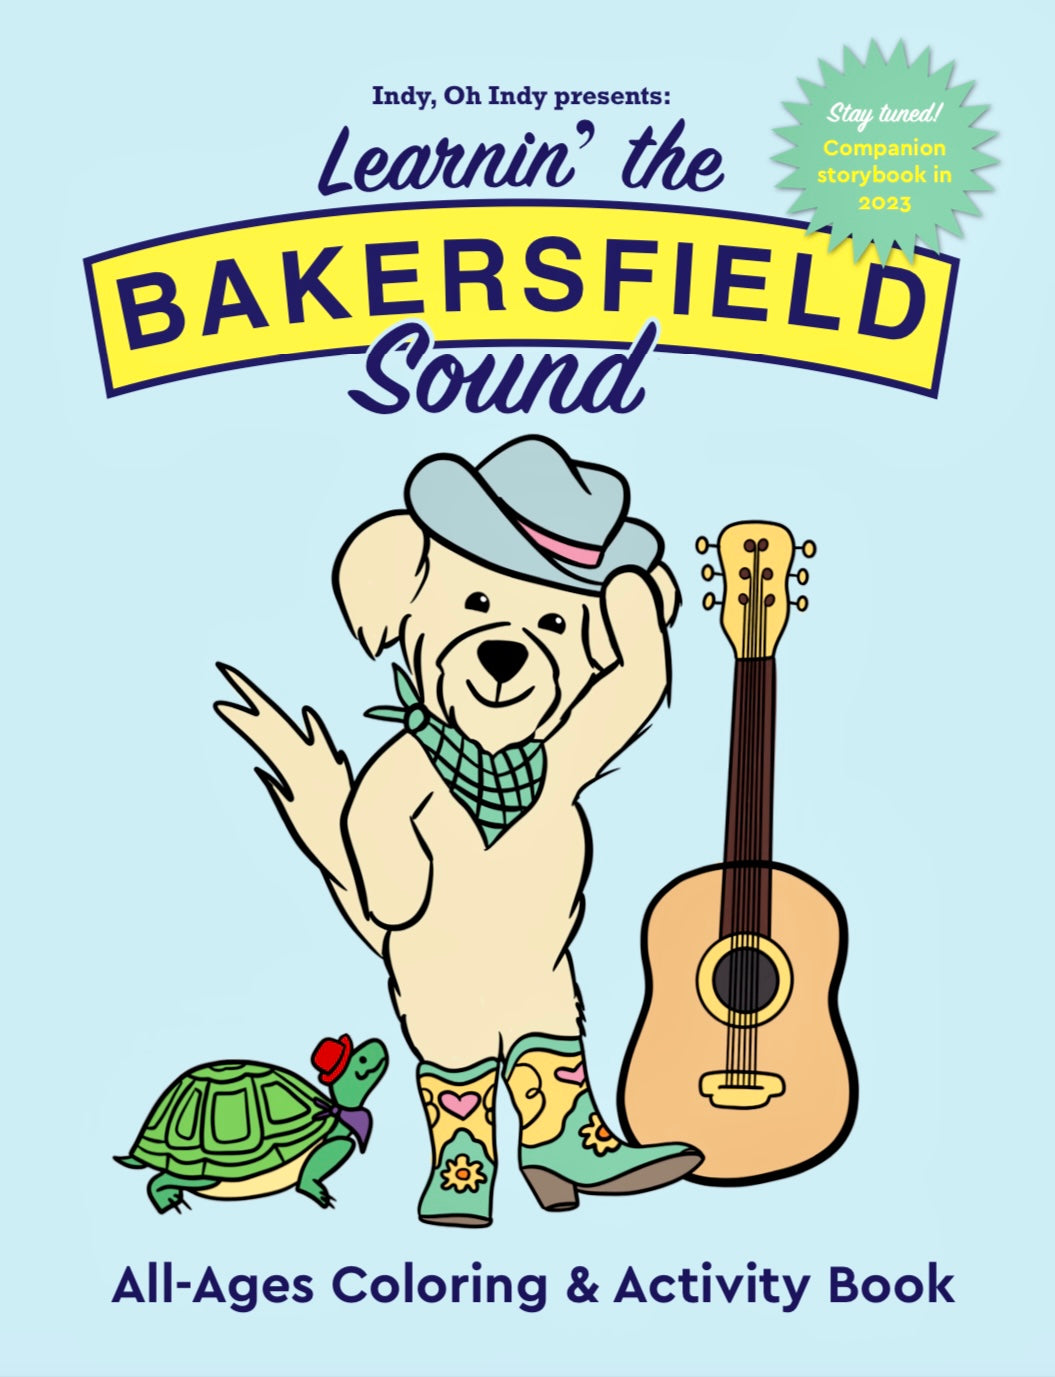 Learnin’ the Bakersfield Sound: All-Ages Coloring & Activity Book